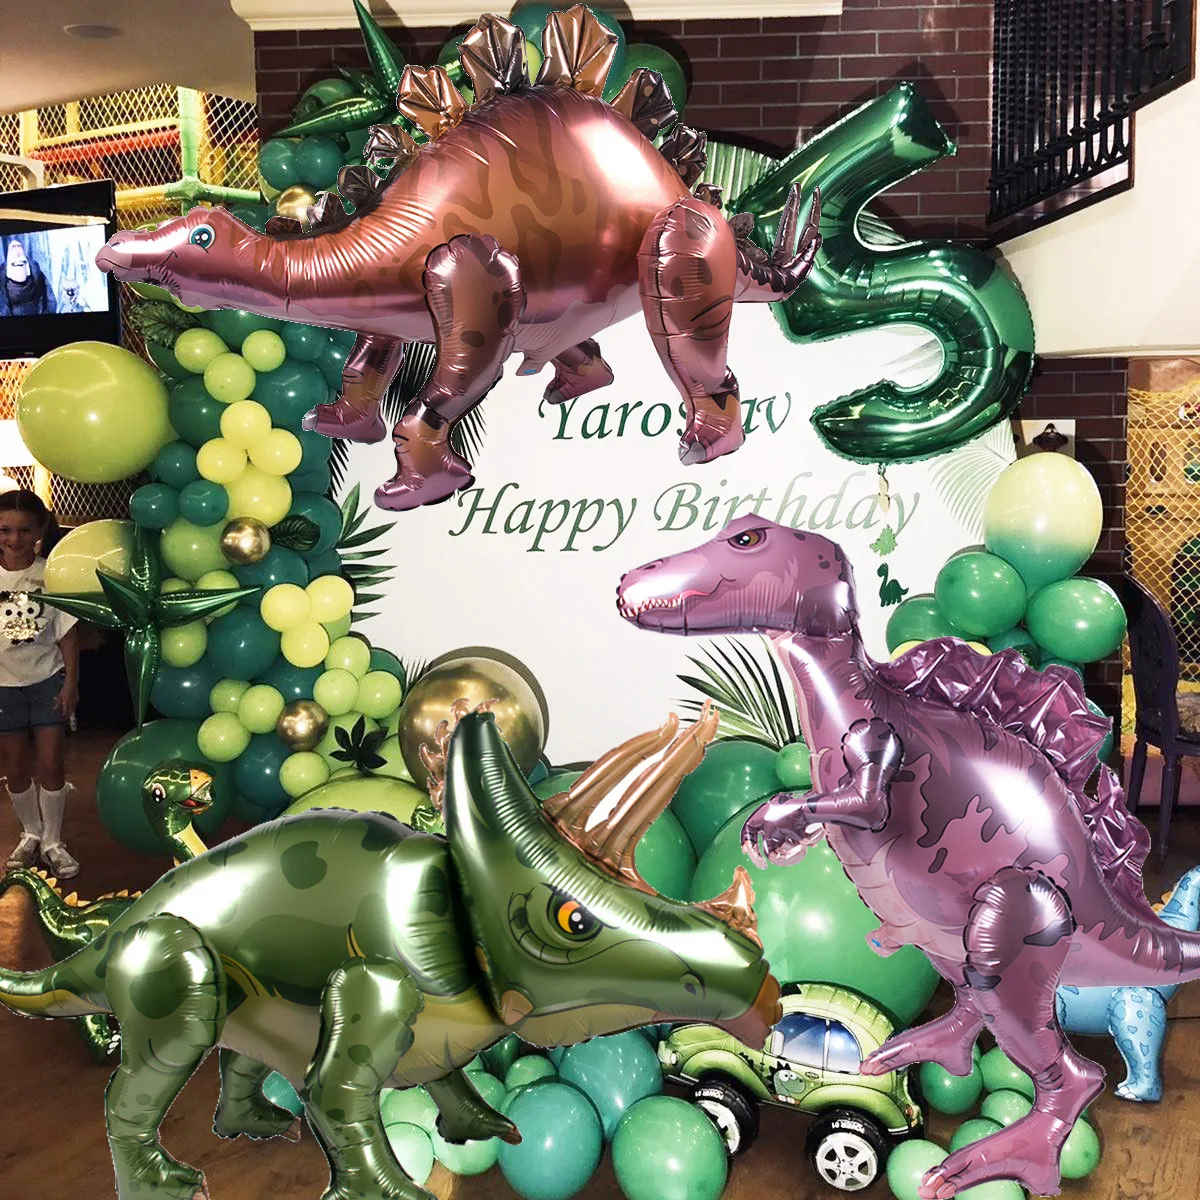 

Large 4D Walking Dinosaur Foil Balloons Boy Birthday Party Decoration Kids Toy Air Globos Baby Shower Dino Themed Party Favors